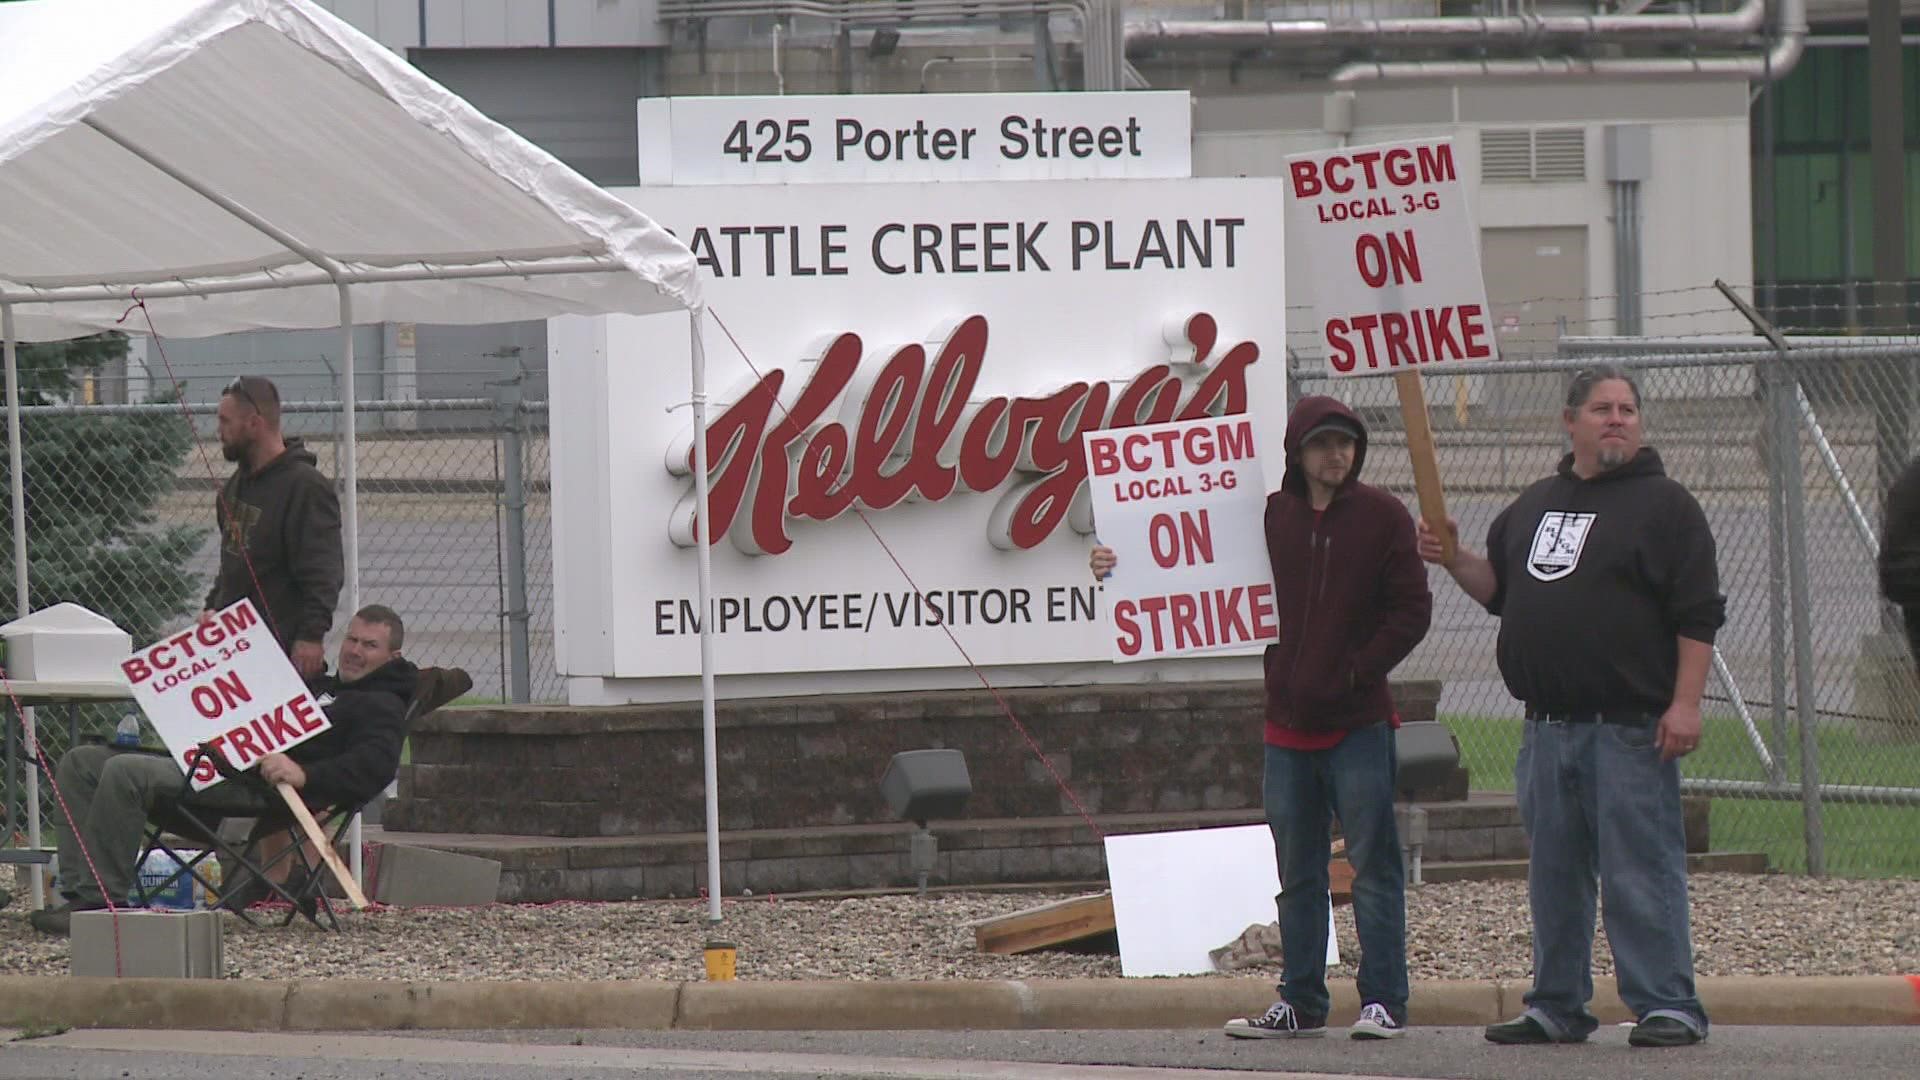 It's the first time in 50 years that Kellogg's worker have walked off the job.